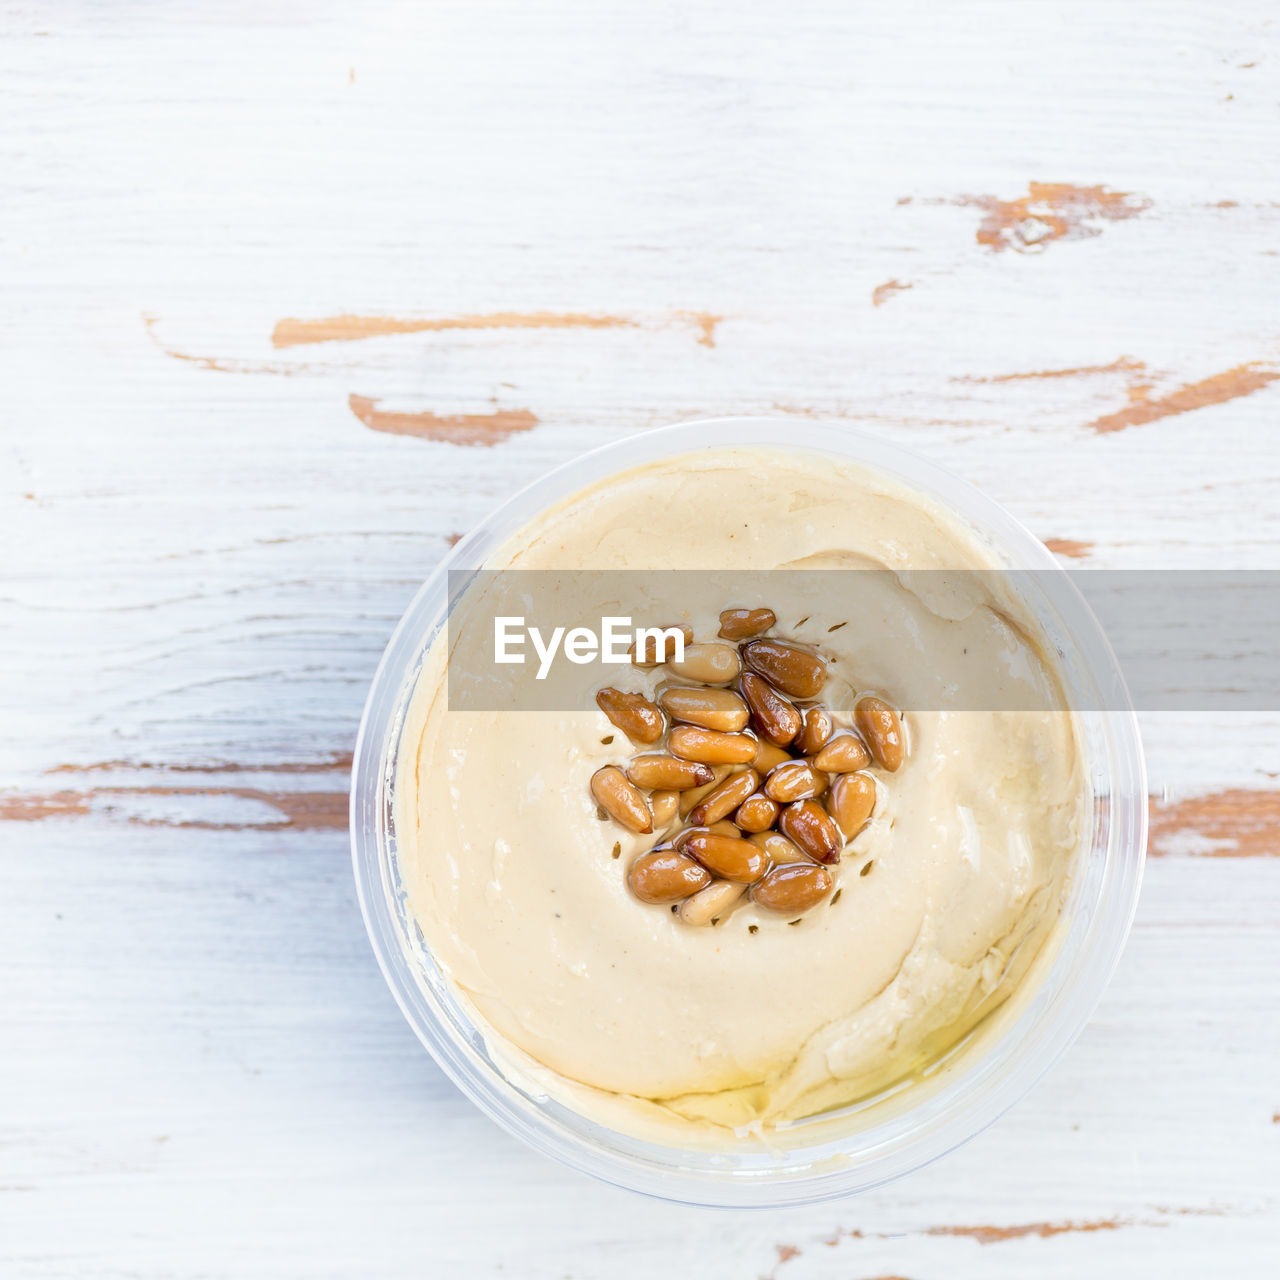 Classic hummus made from chickpeas with pine nuts on top, wooden rustic background, top view